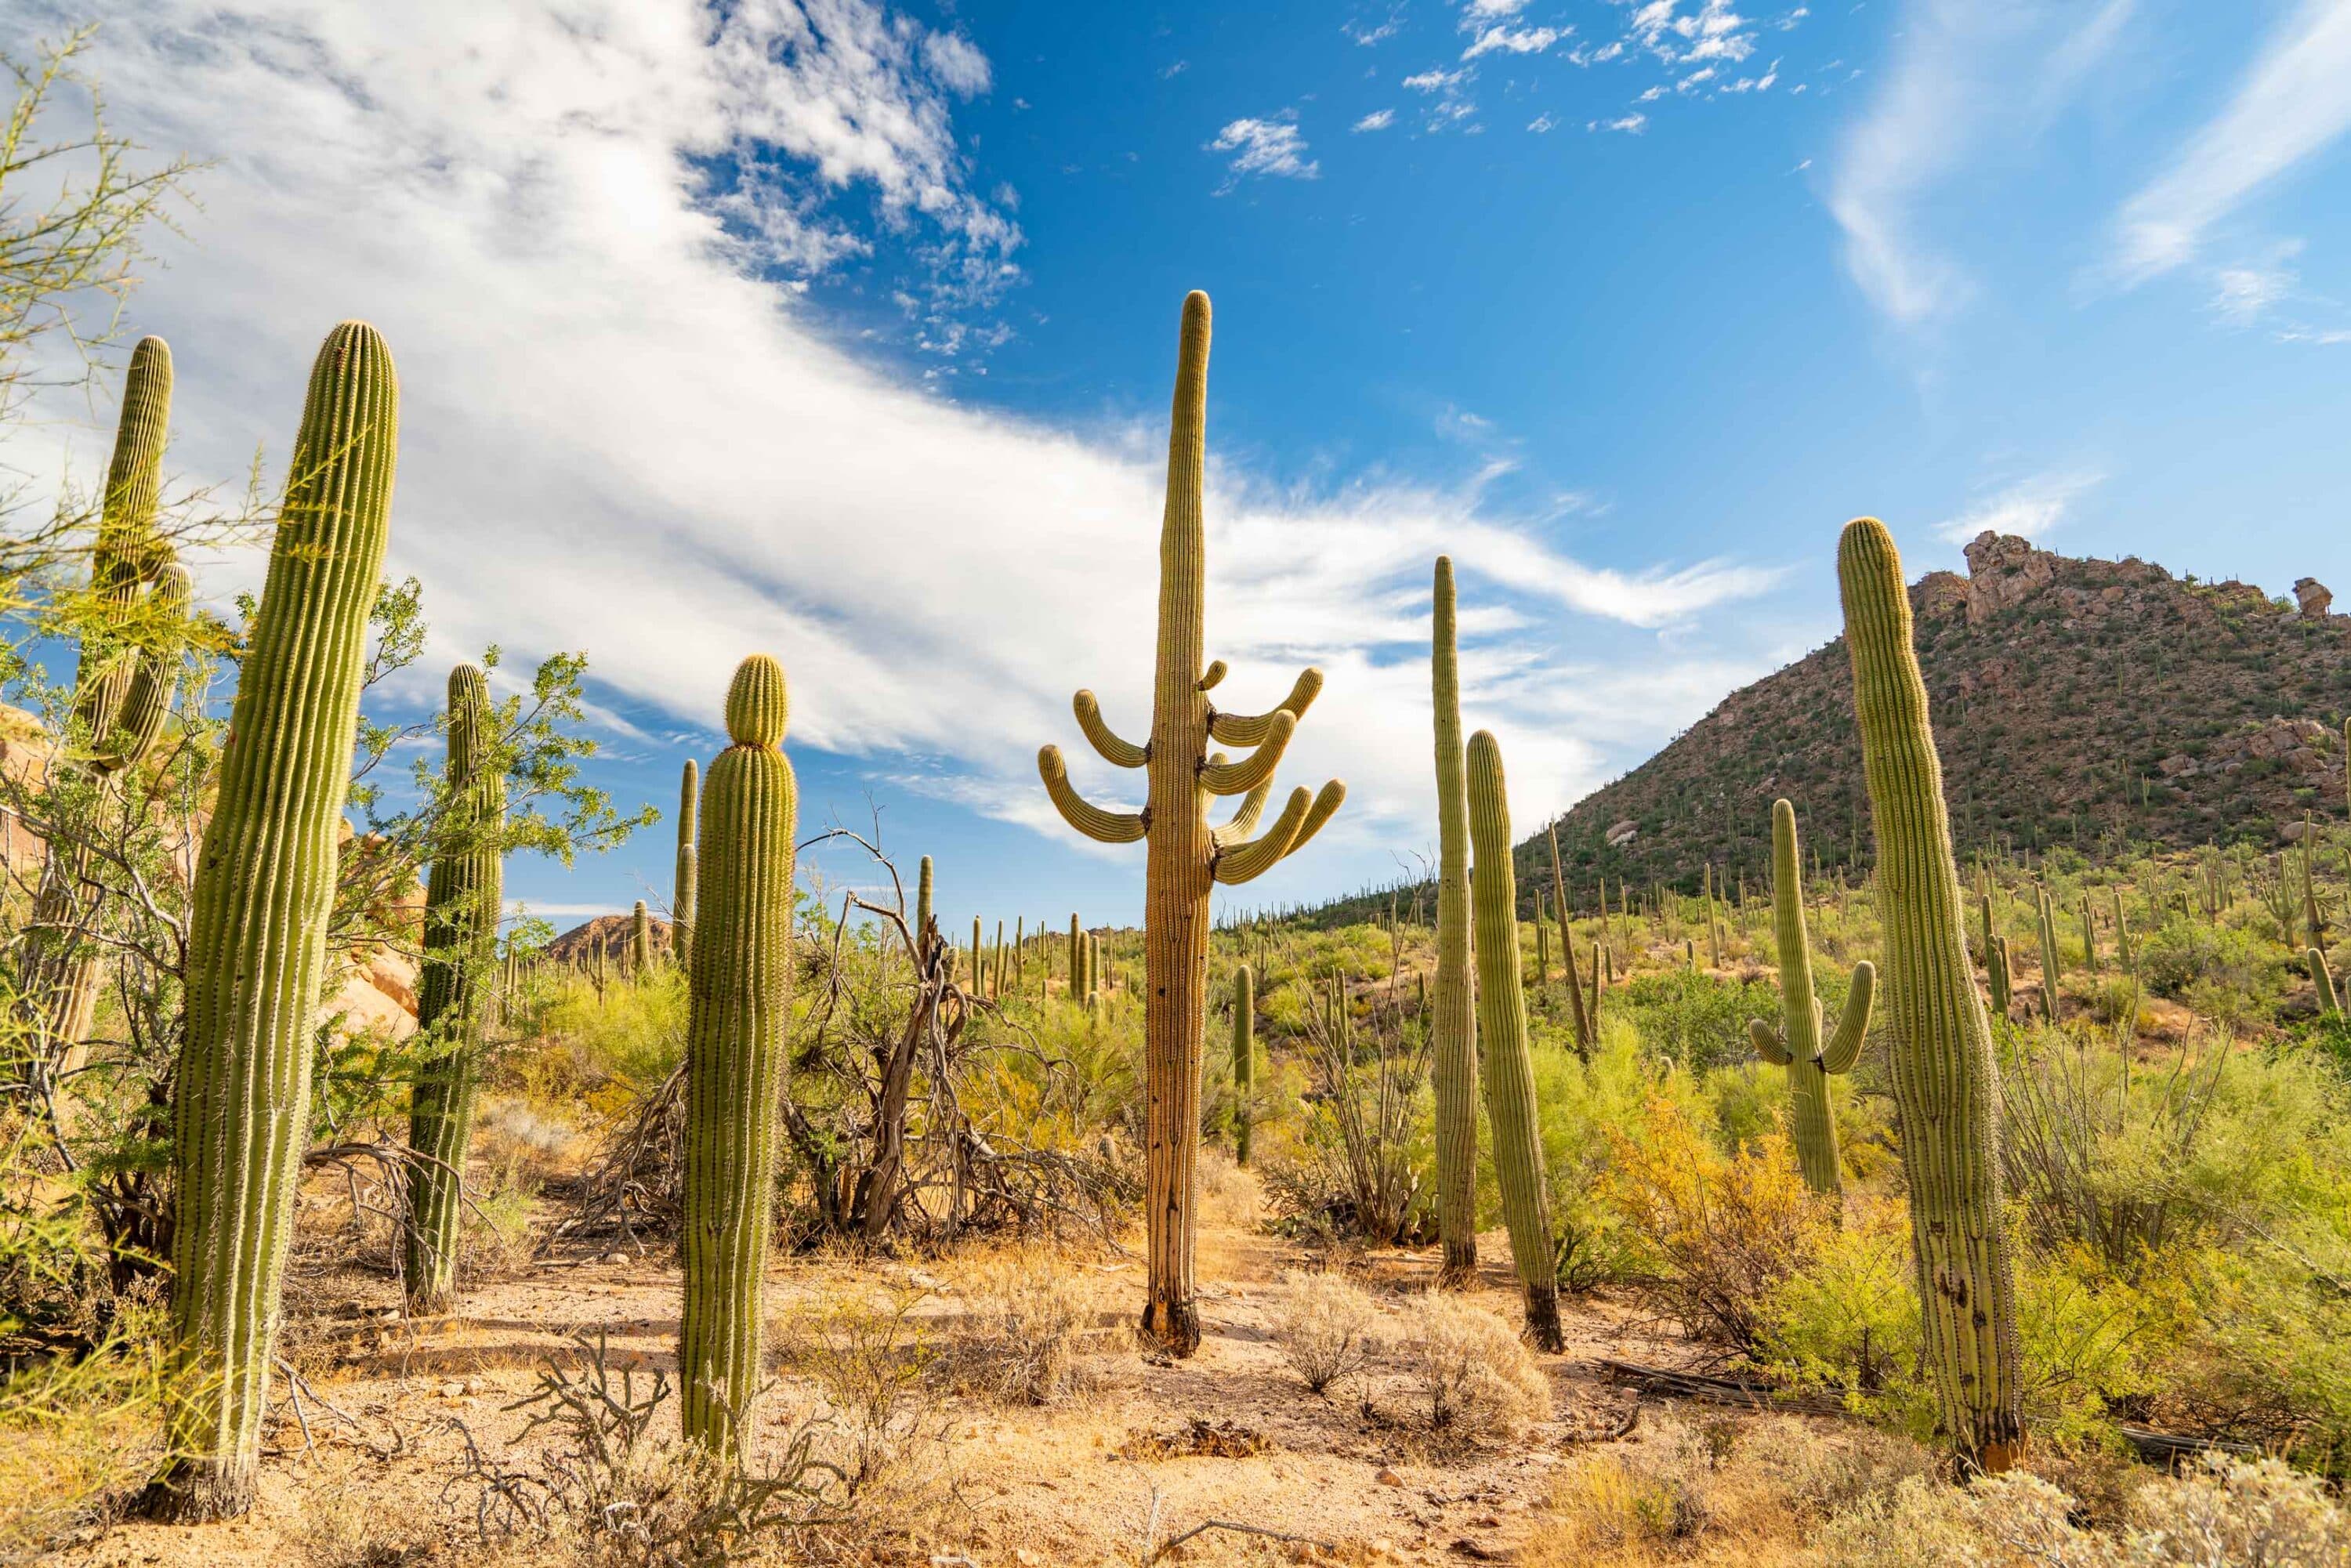 15 JAW-DROPPING Things to Do in SAGUARO National Park (+ Photos)